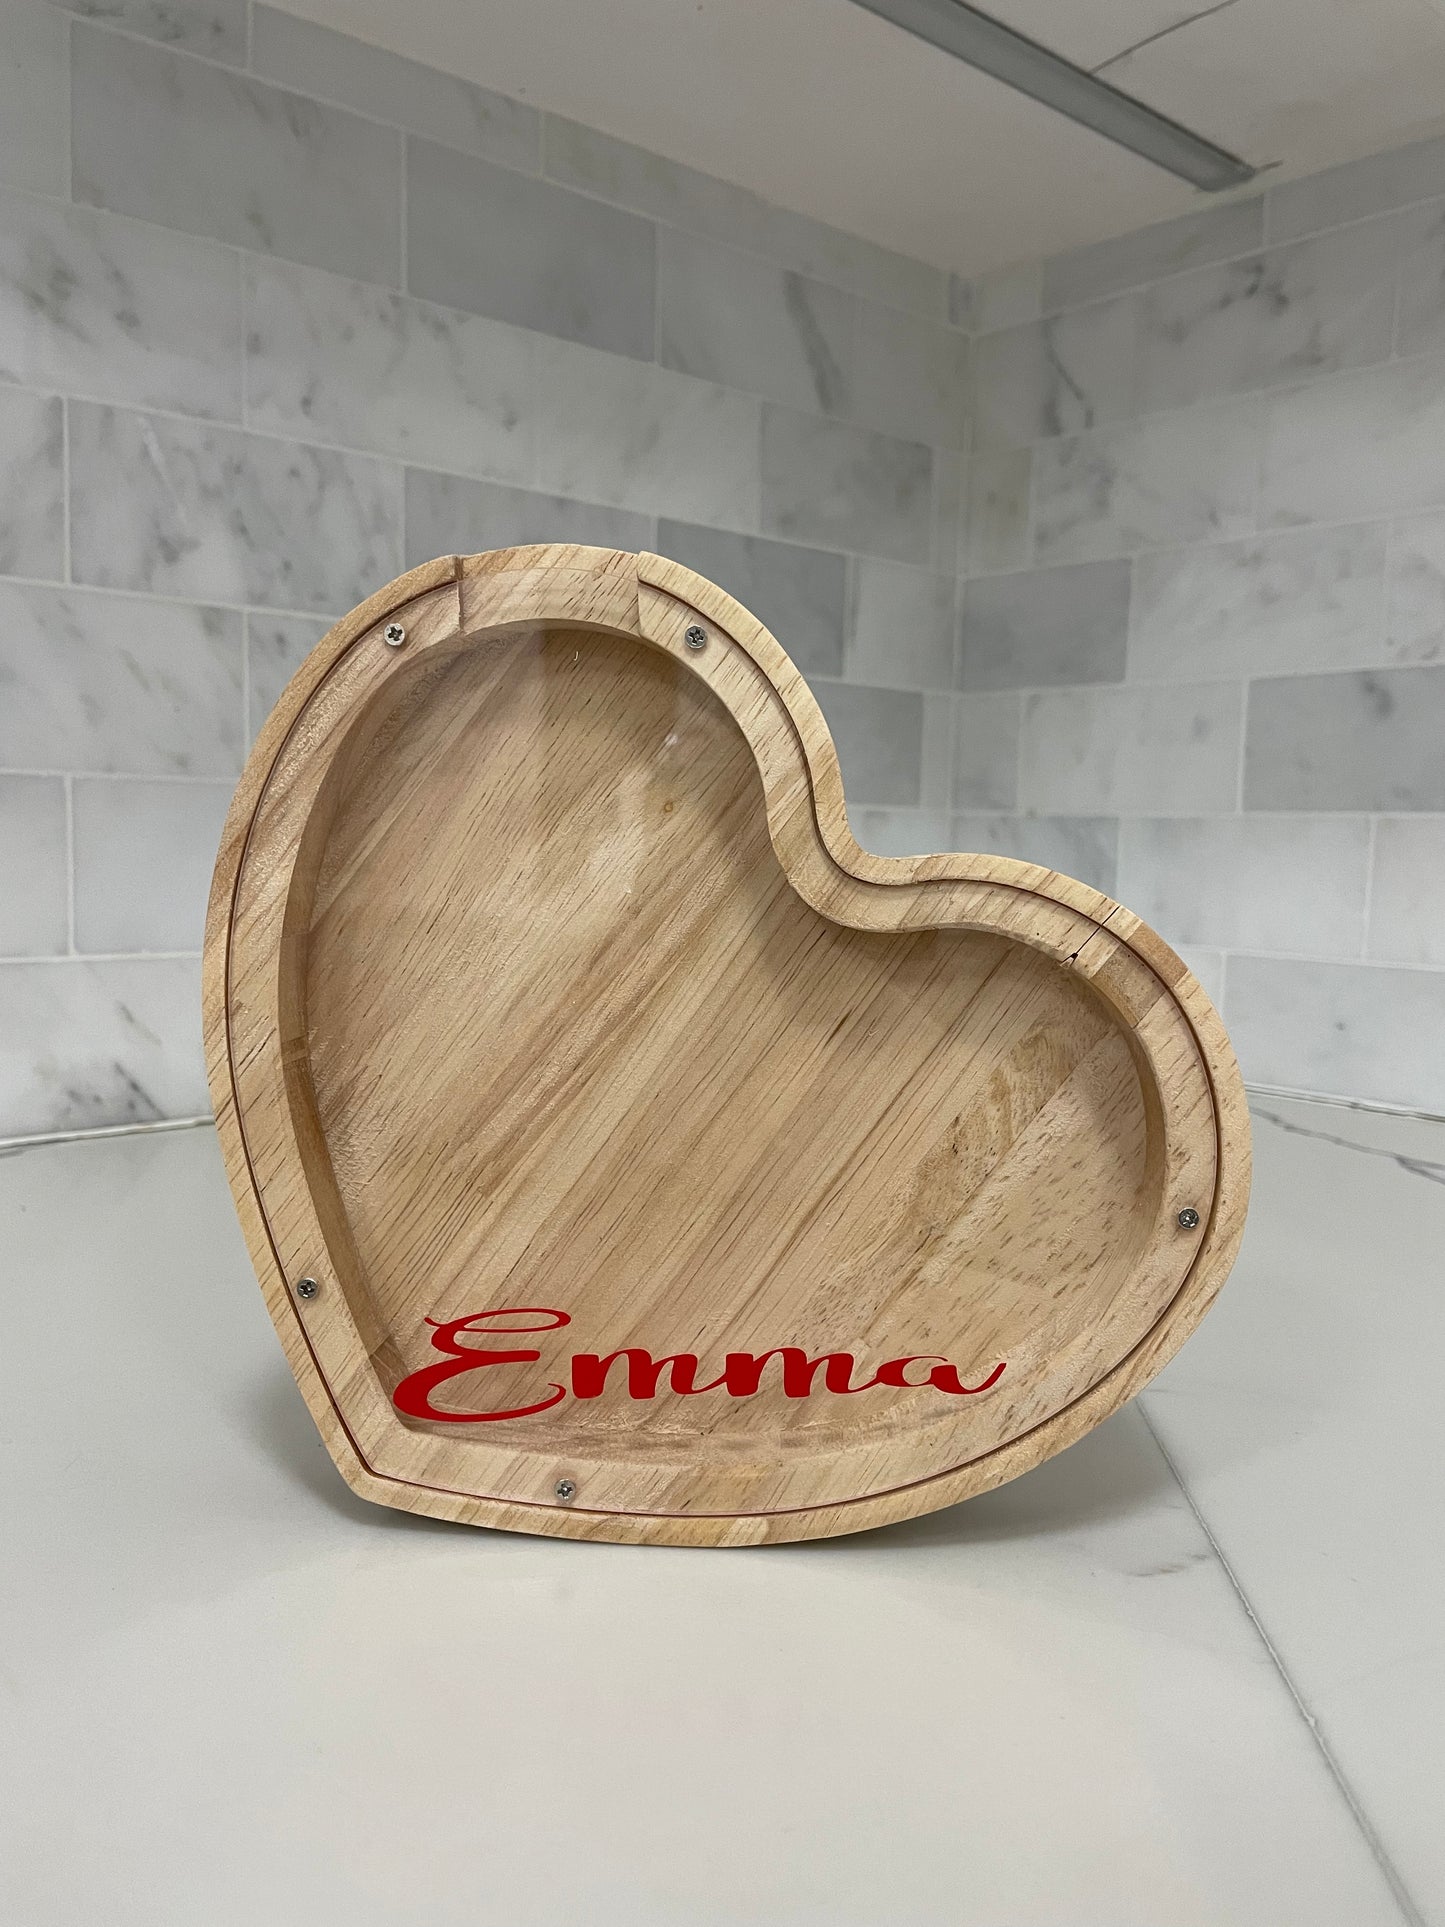 Piggy Banks Personalized Wooden Coin Banks, Initial Letter Money Box for Kids, Boys, Girls, Birthday Gifts, Easter, Holiday Gifts